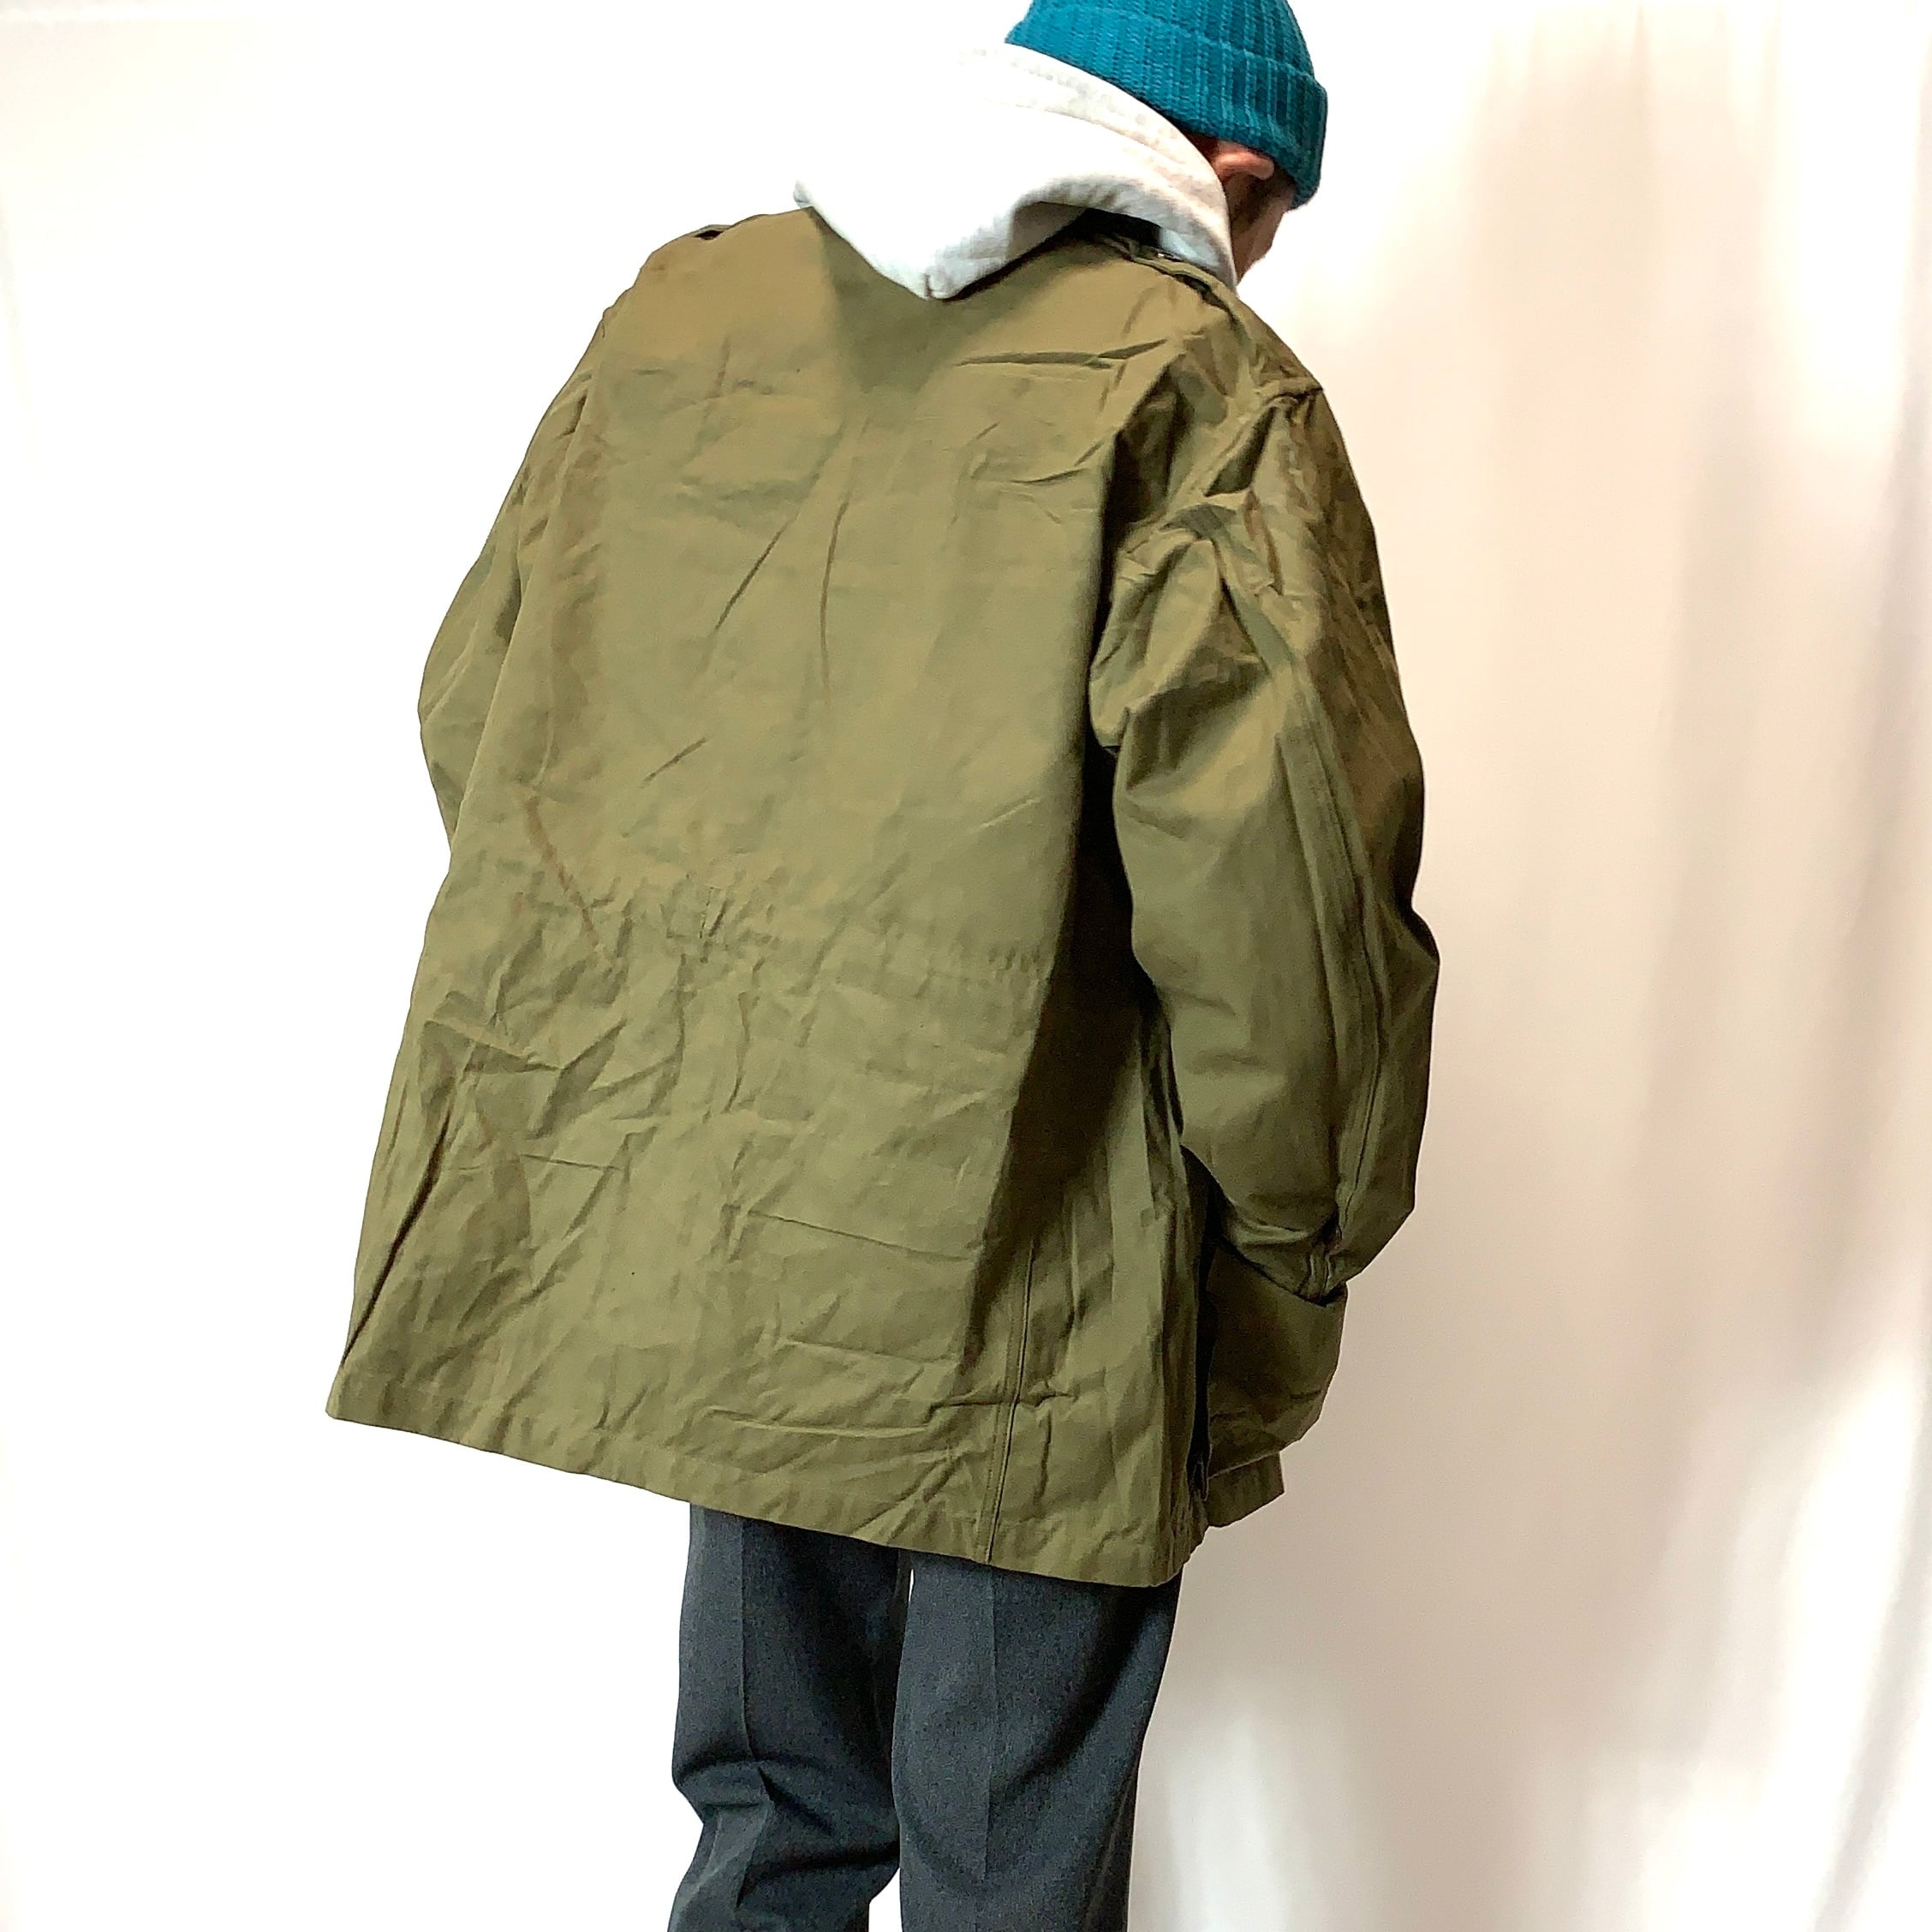 vintage old french military jacket 50s deadstock M-47 フランス軍 ...